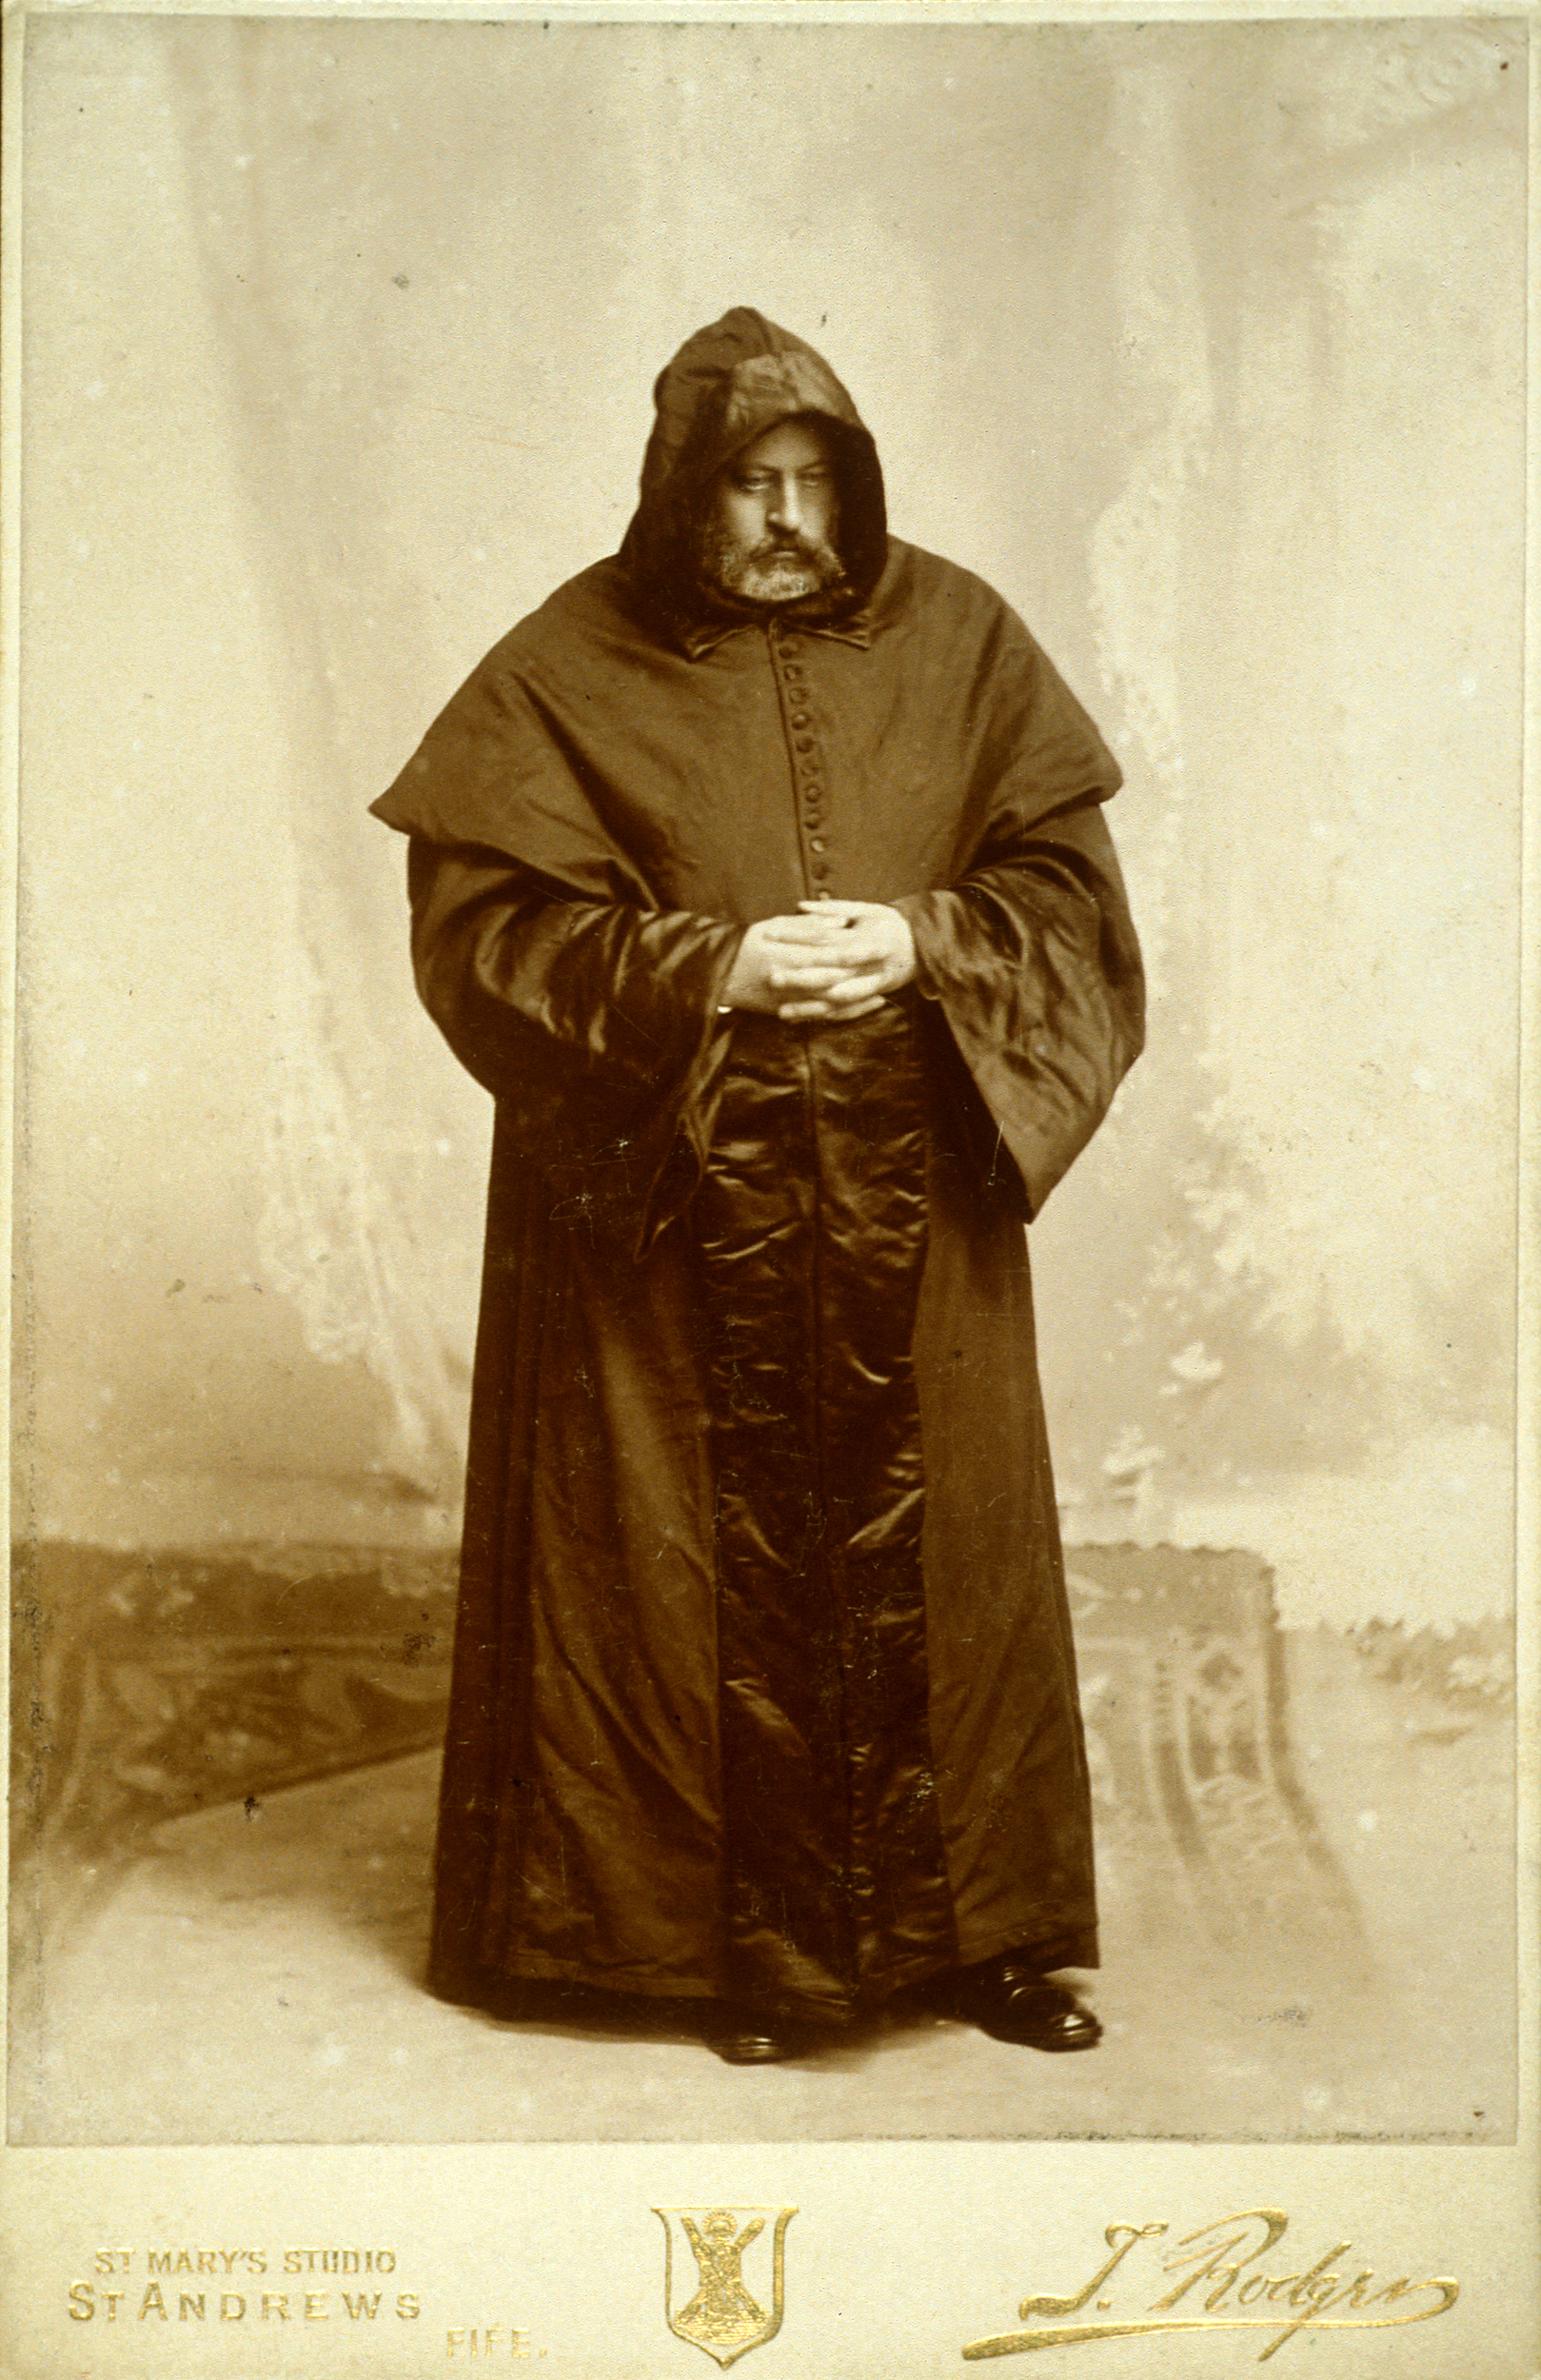 John Crichton-Stuart, 3rd Marquess of Bute, Rector of the University 1892-98, wearing robes which pay homage to the medieval past of the university (St Andrews GPS-StuartJPS-1)   